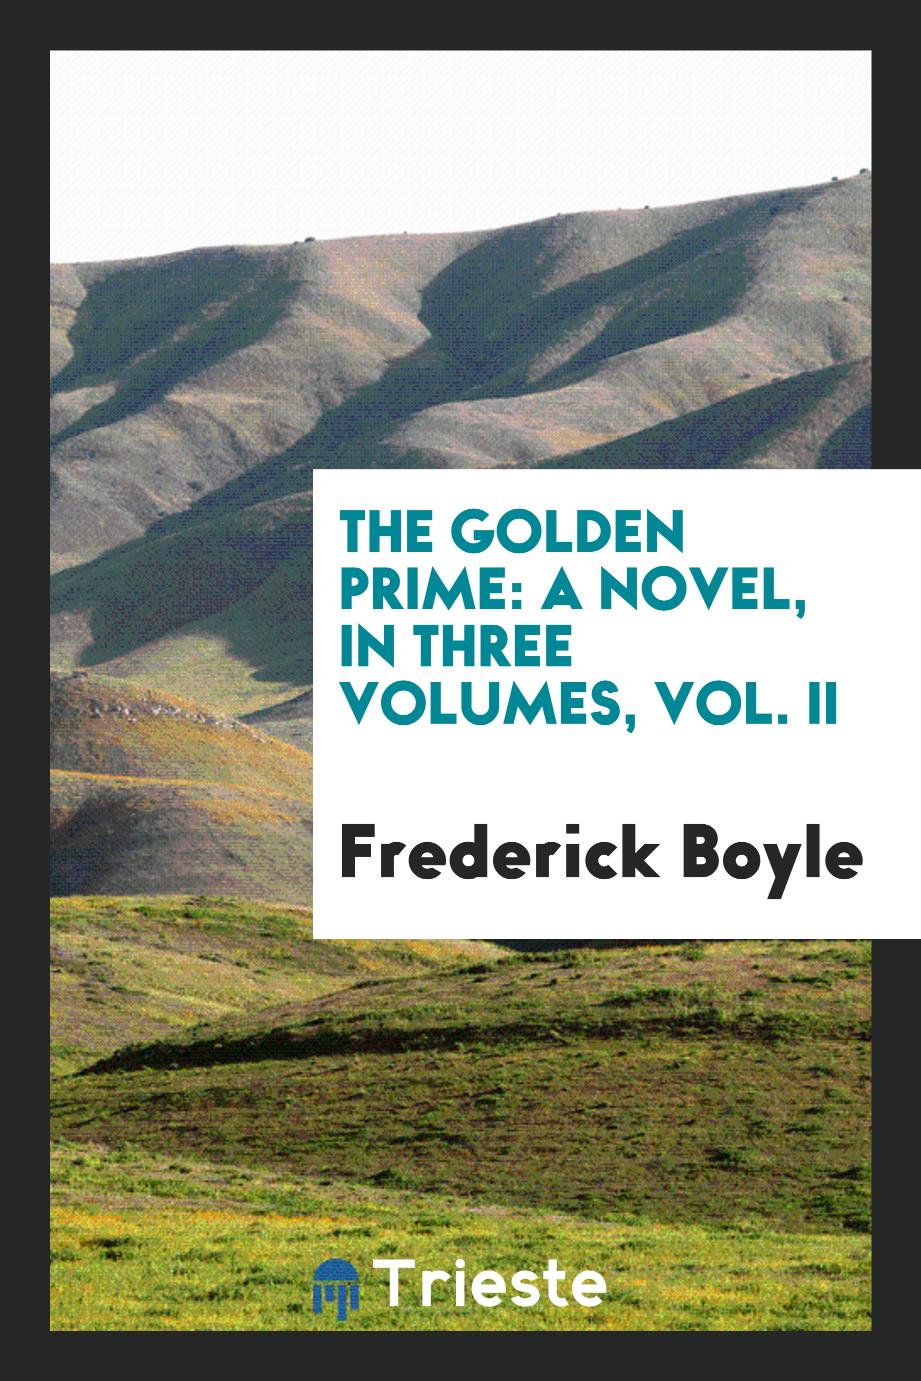 The golden prime: a novel, in three volumes, vol. II